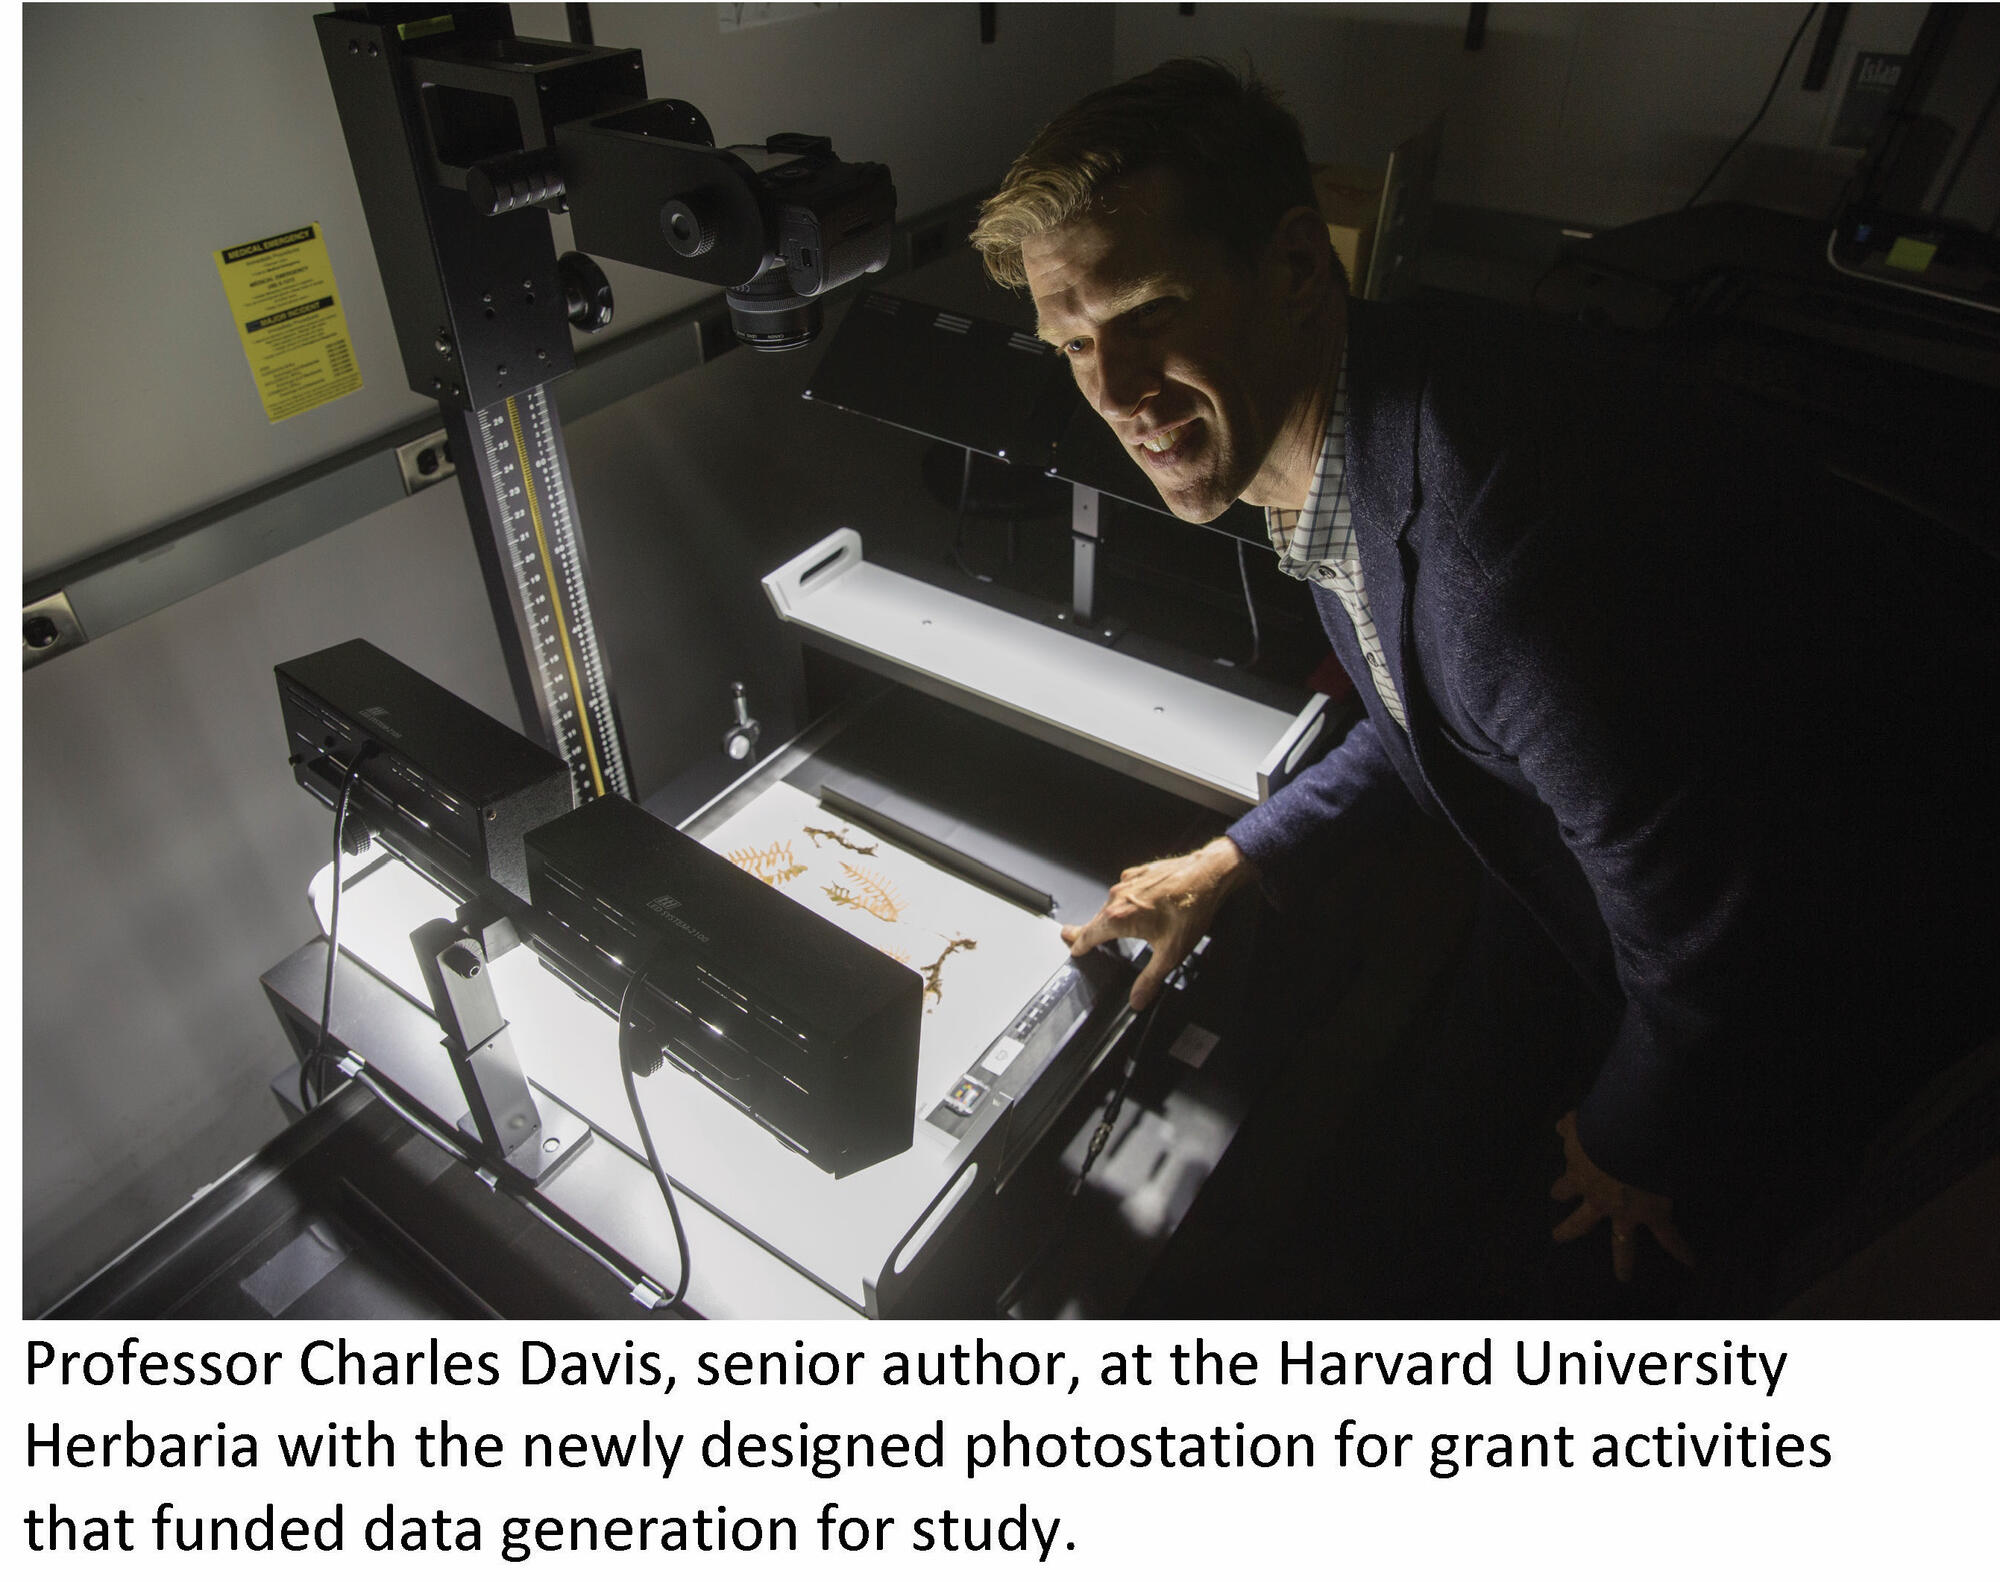 Professor Charles Davis, senior author, at the Harvard University Herbaria with the newly designed photostation for grant activities that funded data generation for this study.